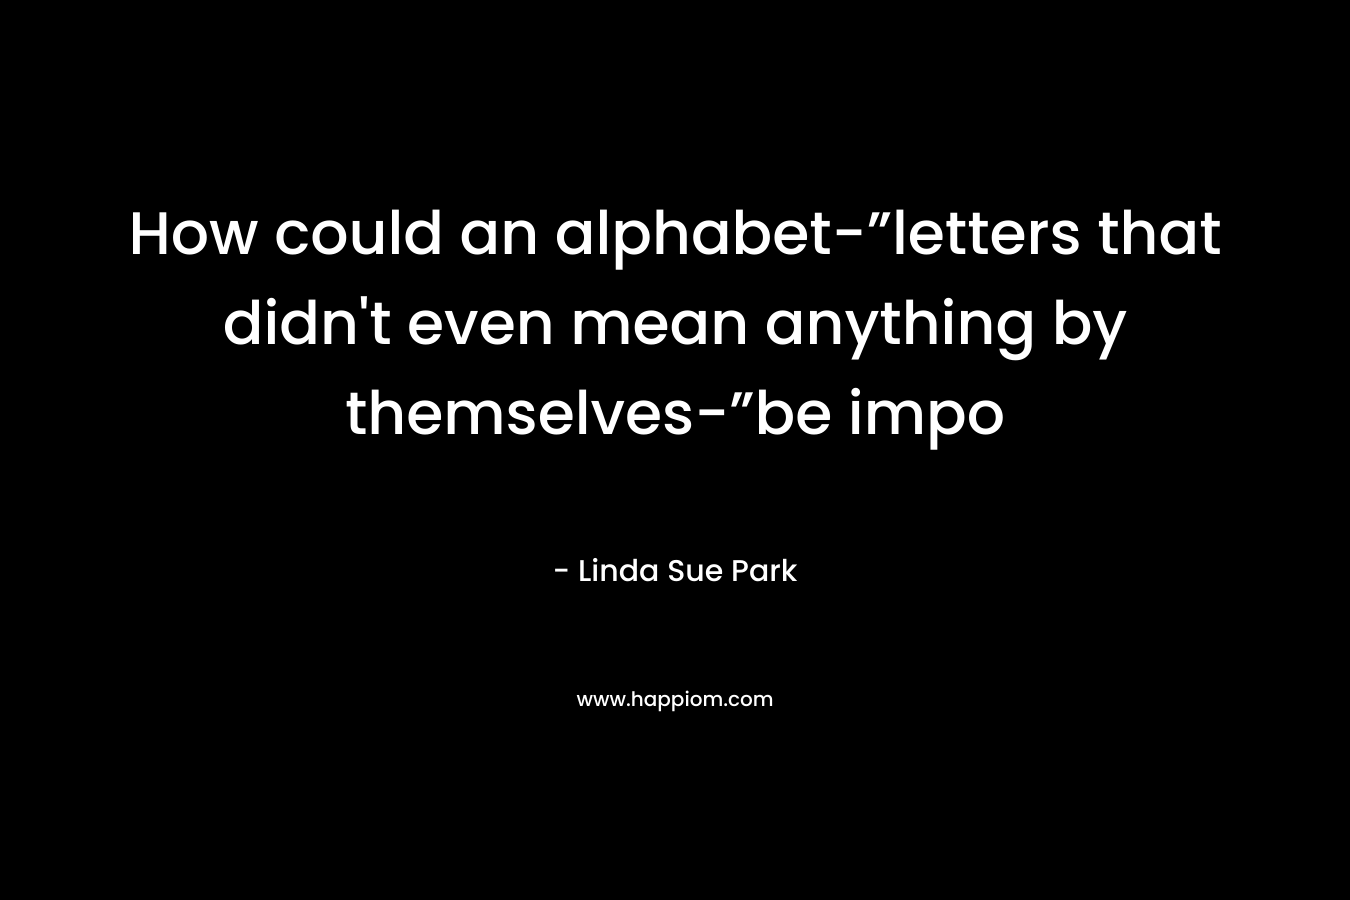 How could an alphabet-”letters that didn't even mean anything by themselves-”be impo